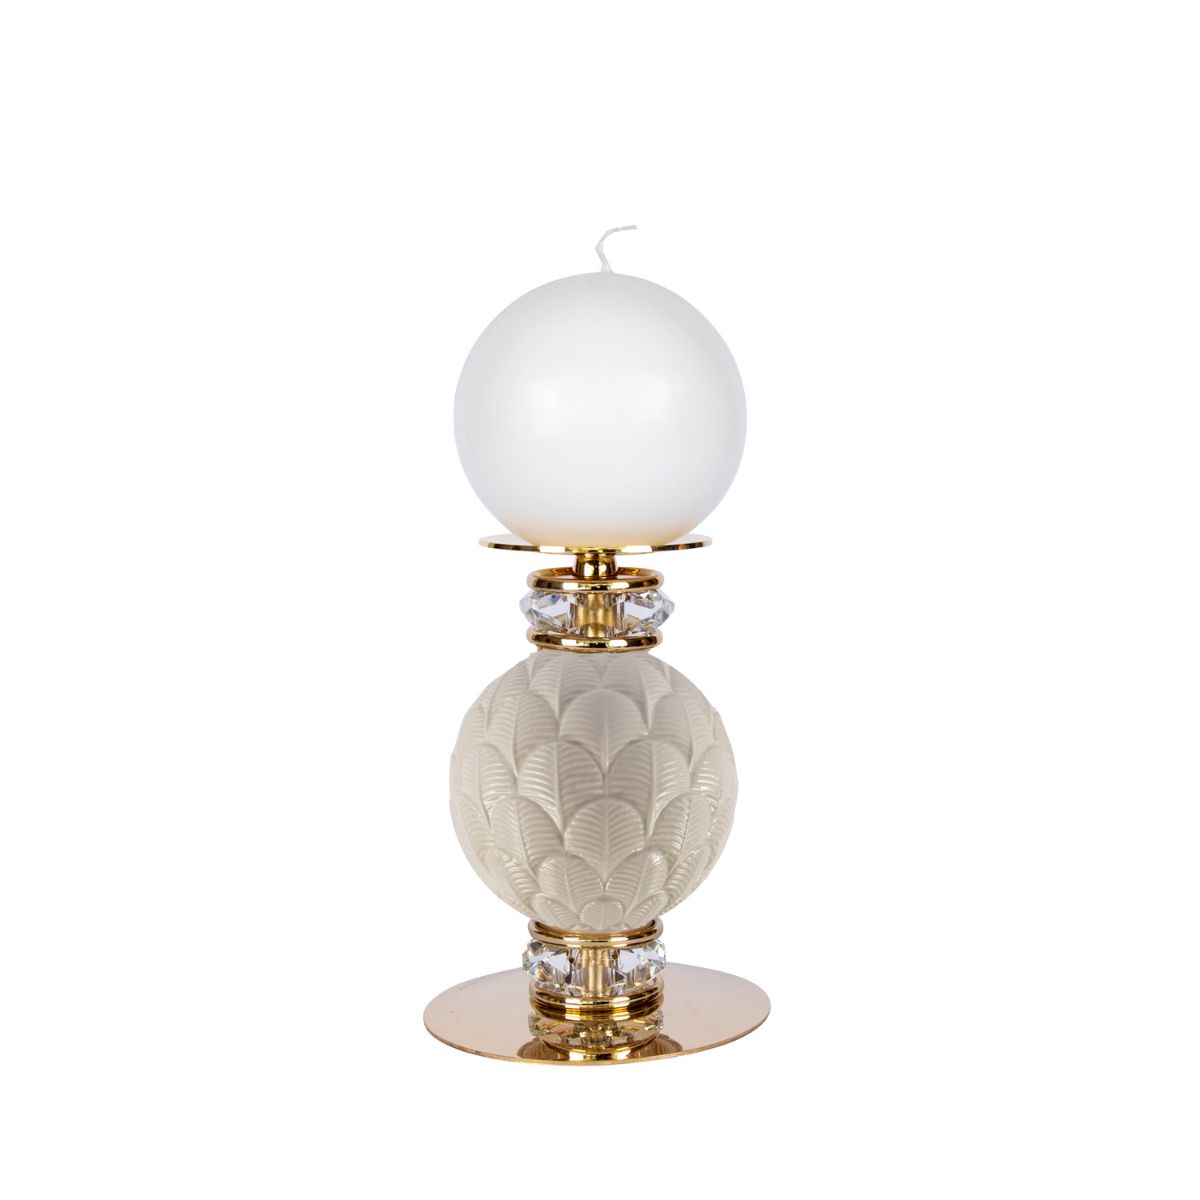 Peacock Small Candle Holder - White & Gold